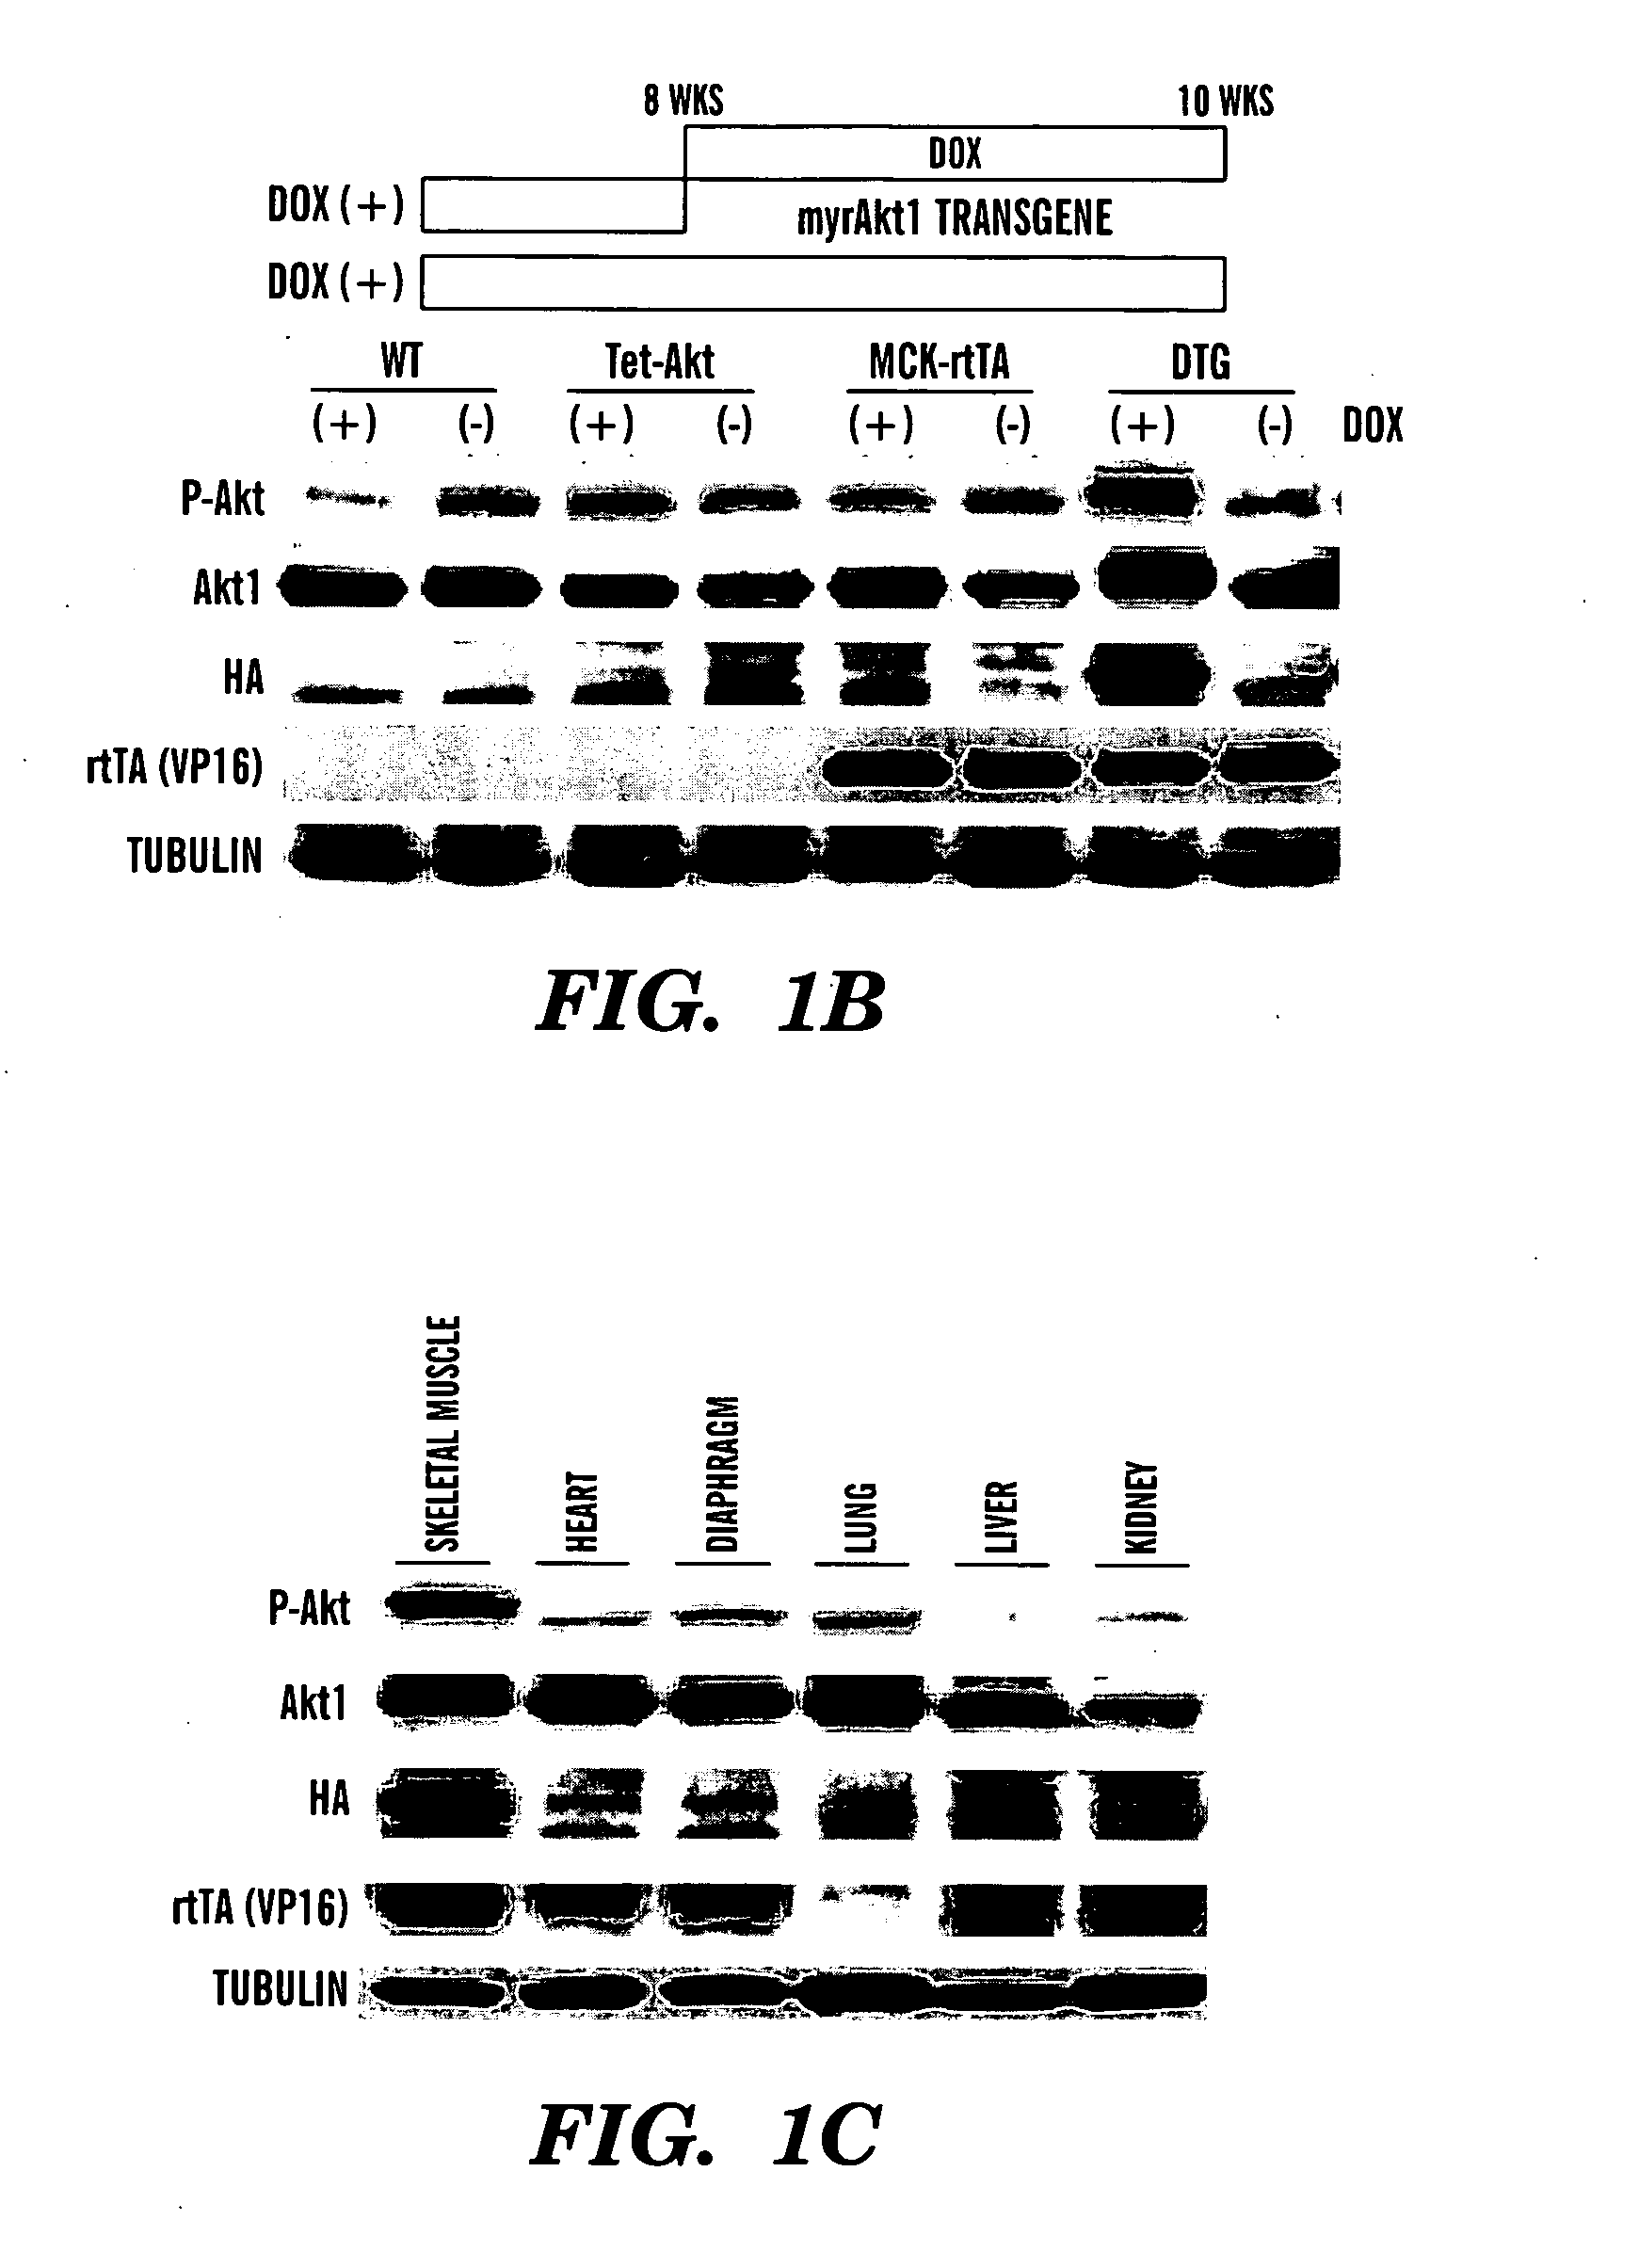 Methods to identify factors associated with muscle growth and uses thereof